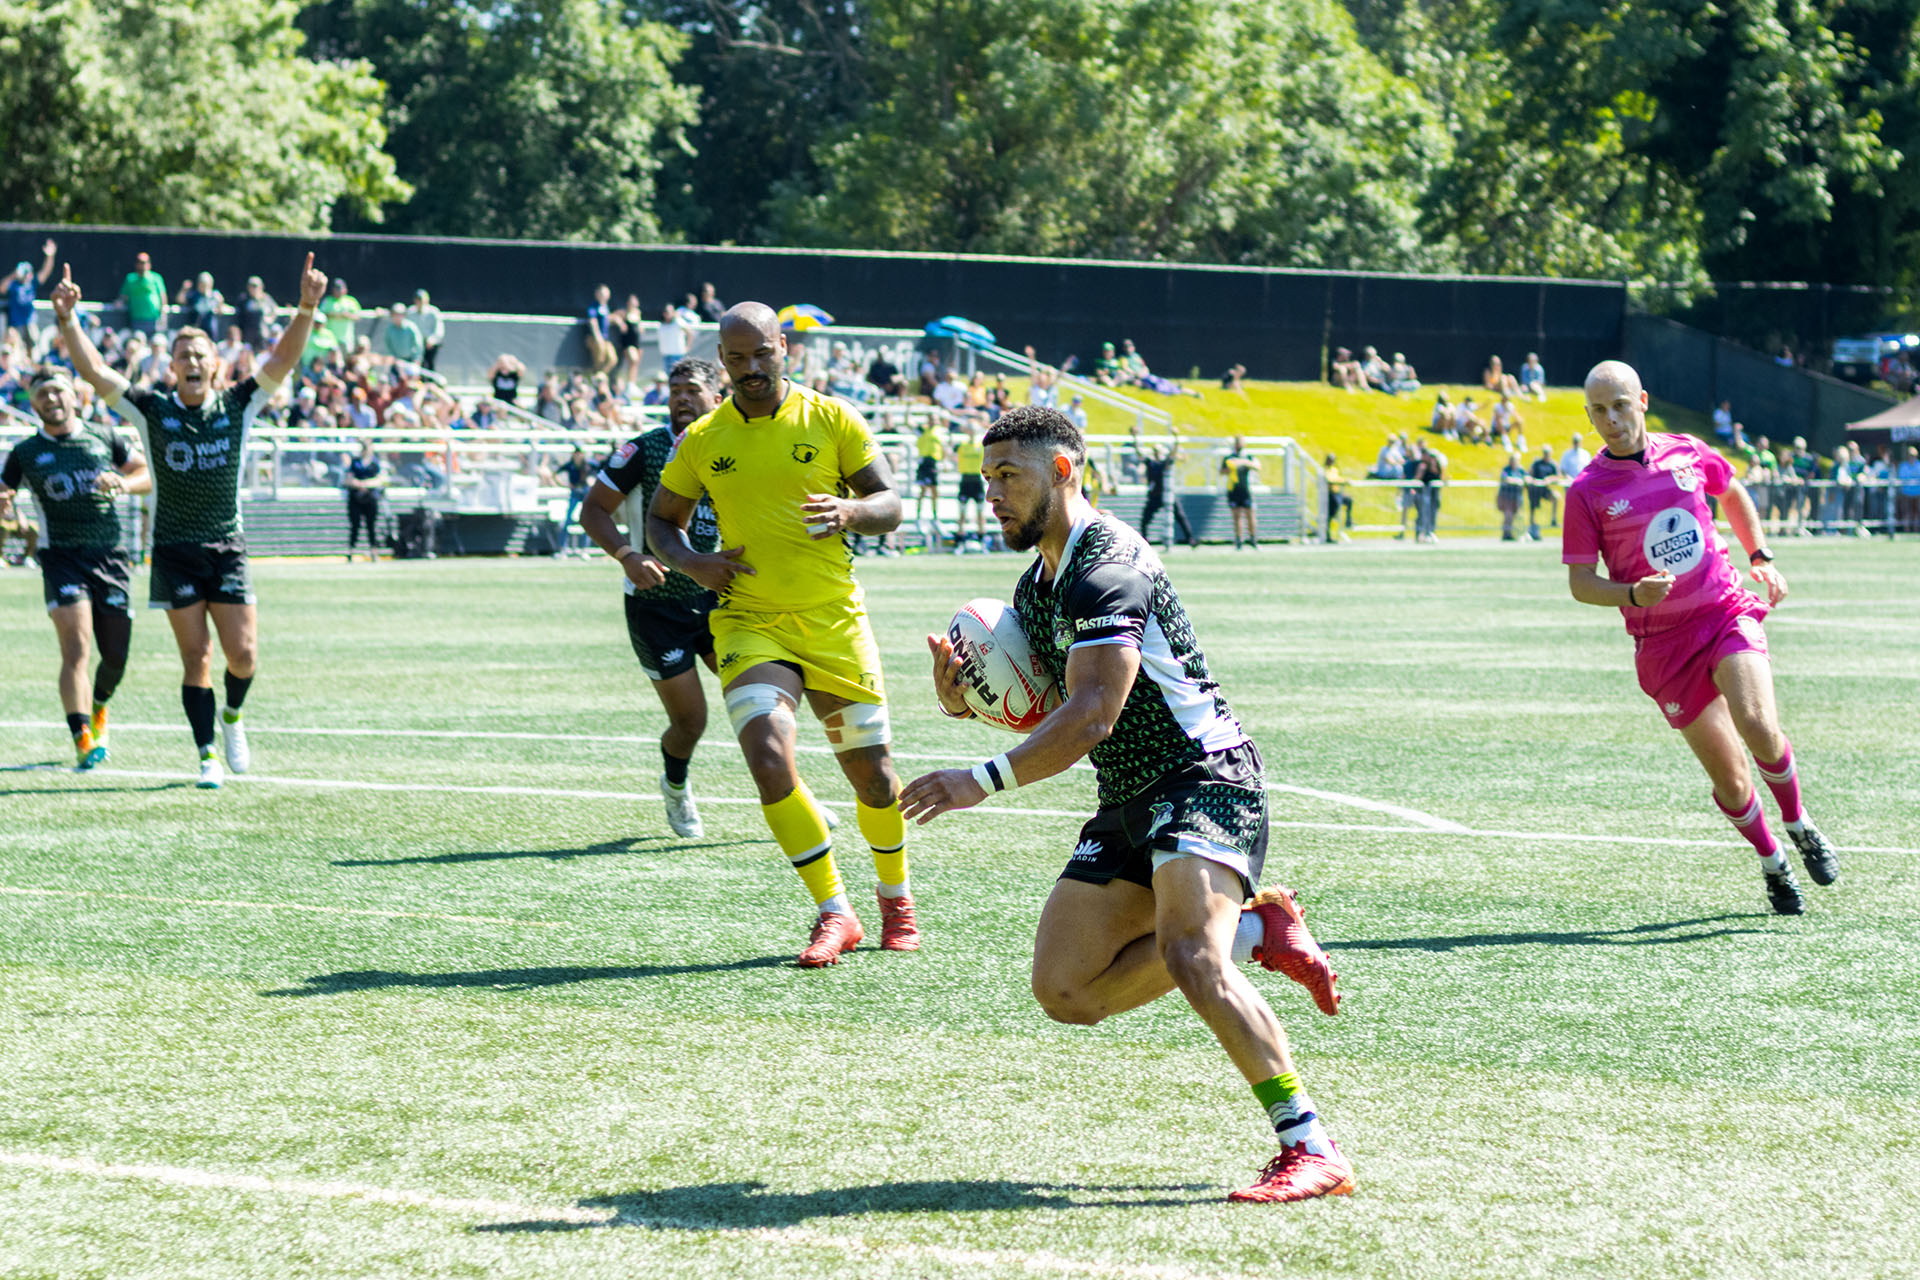 Seawolves Advance to Western Conference Finals with Win Over SaberCats 37-26